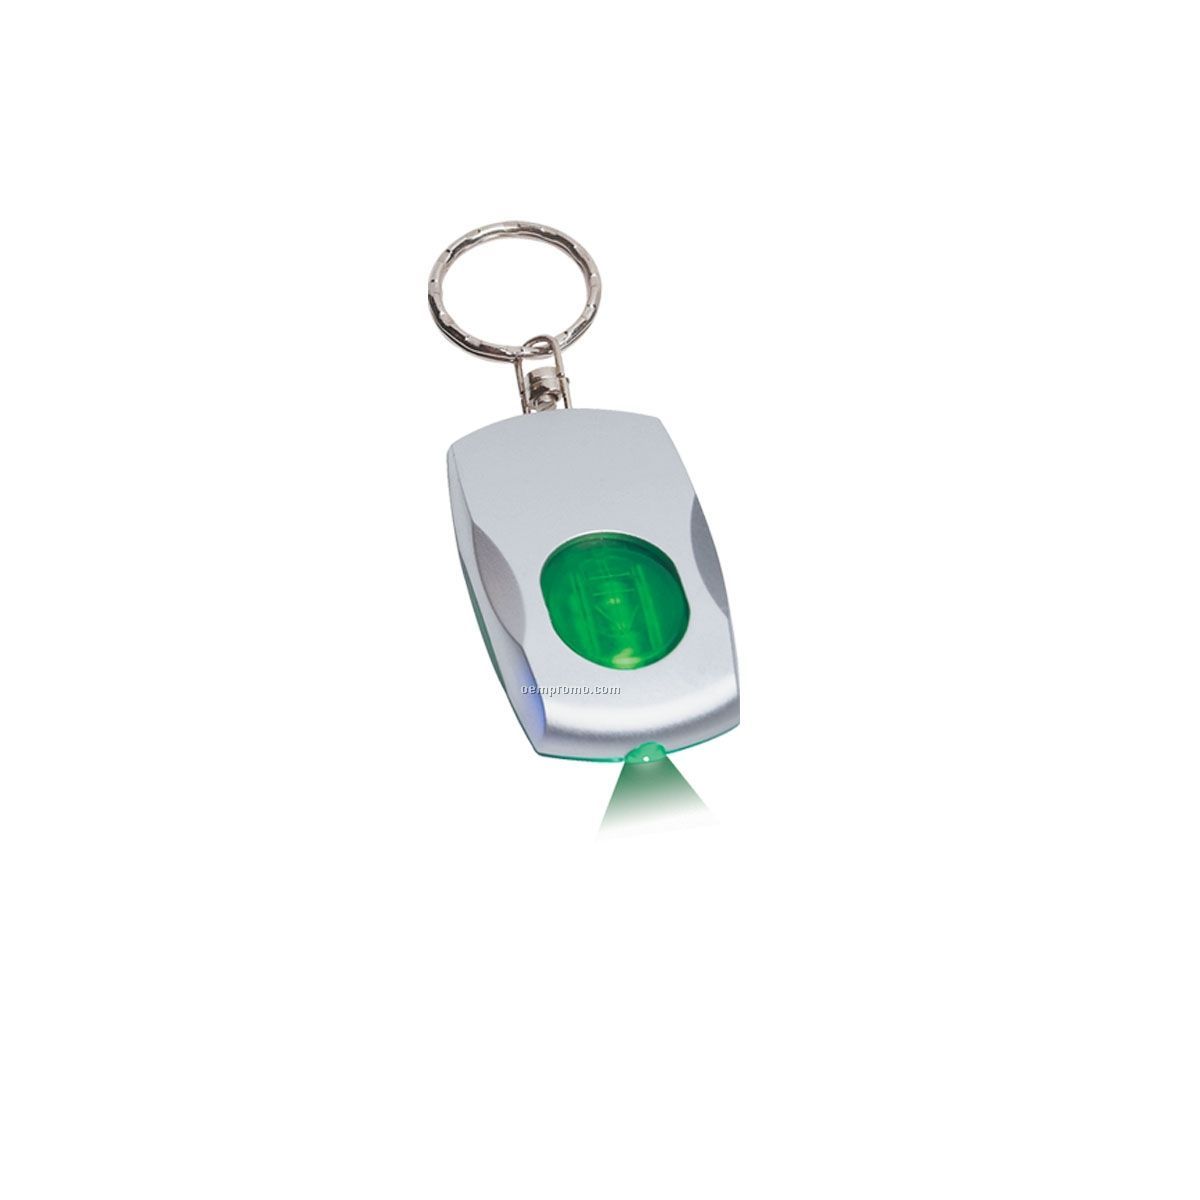 Light Up Keychain - Silver W/ Green Accents & White LED